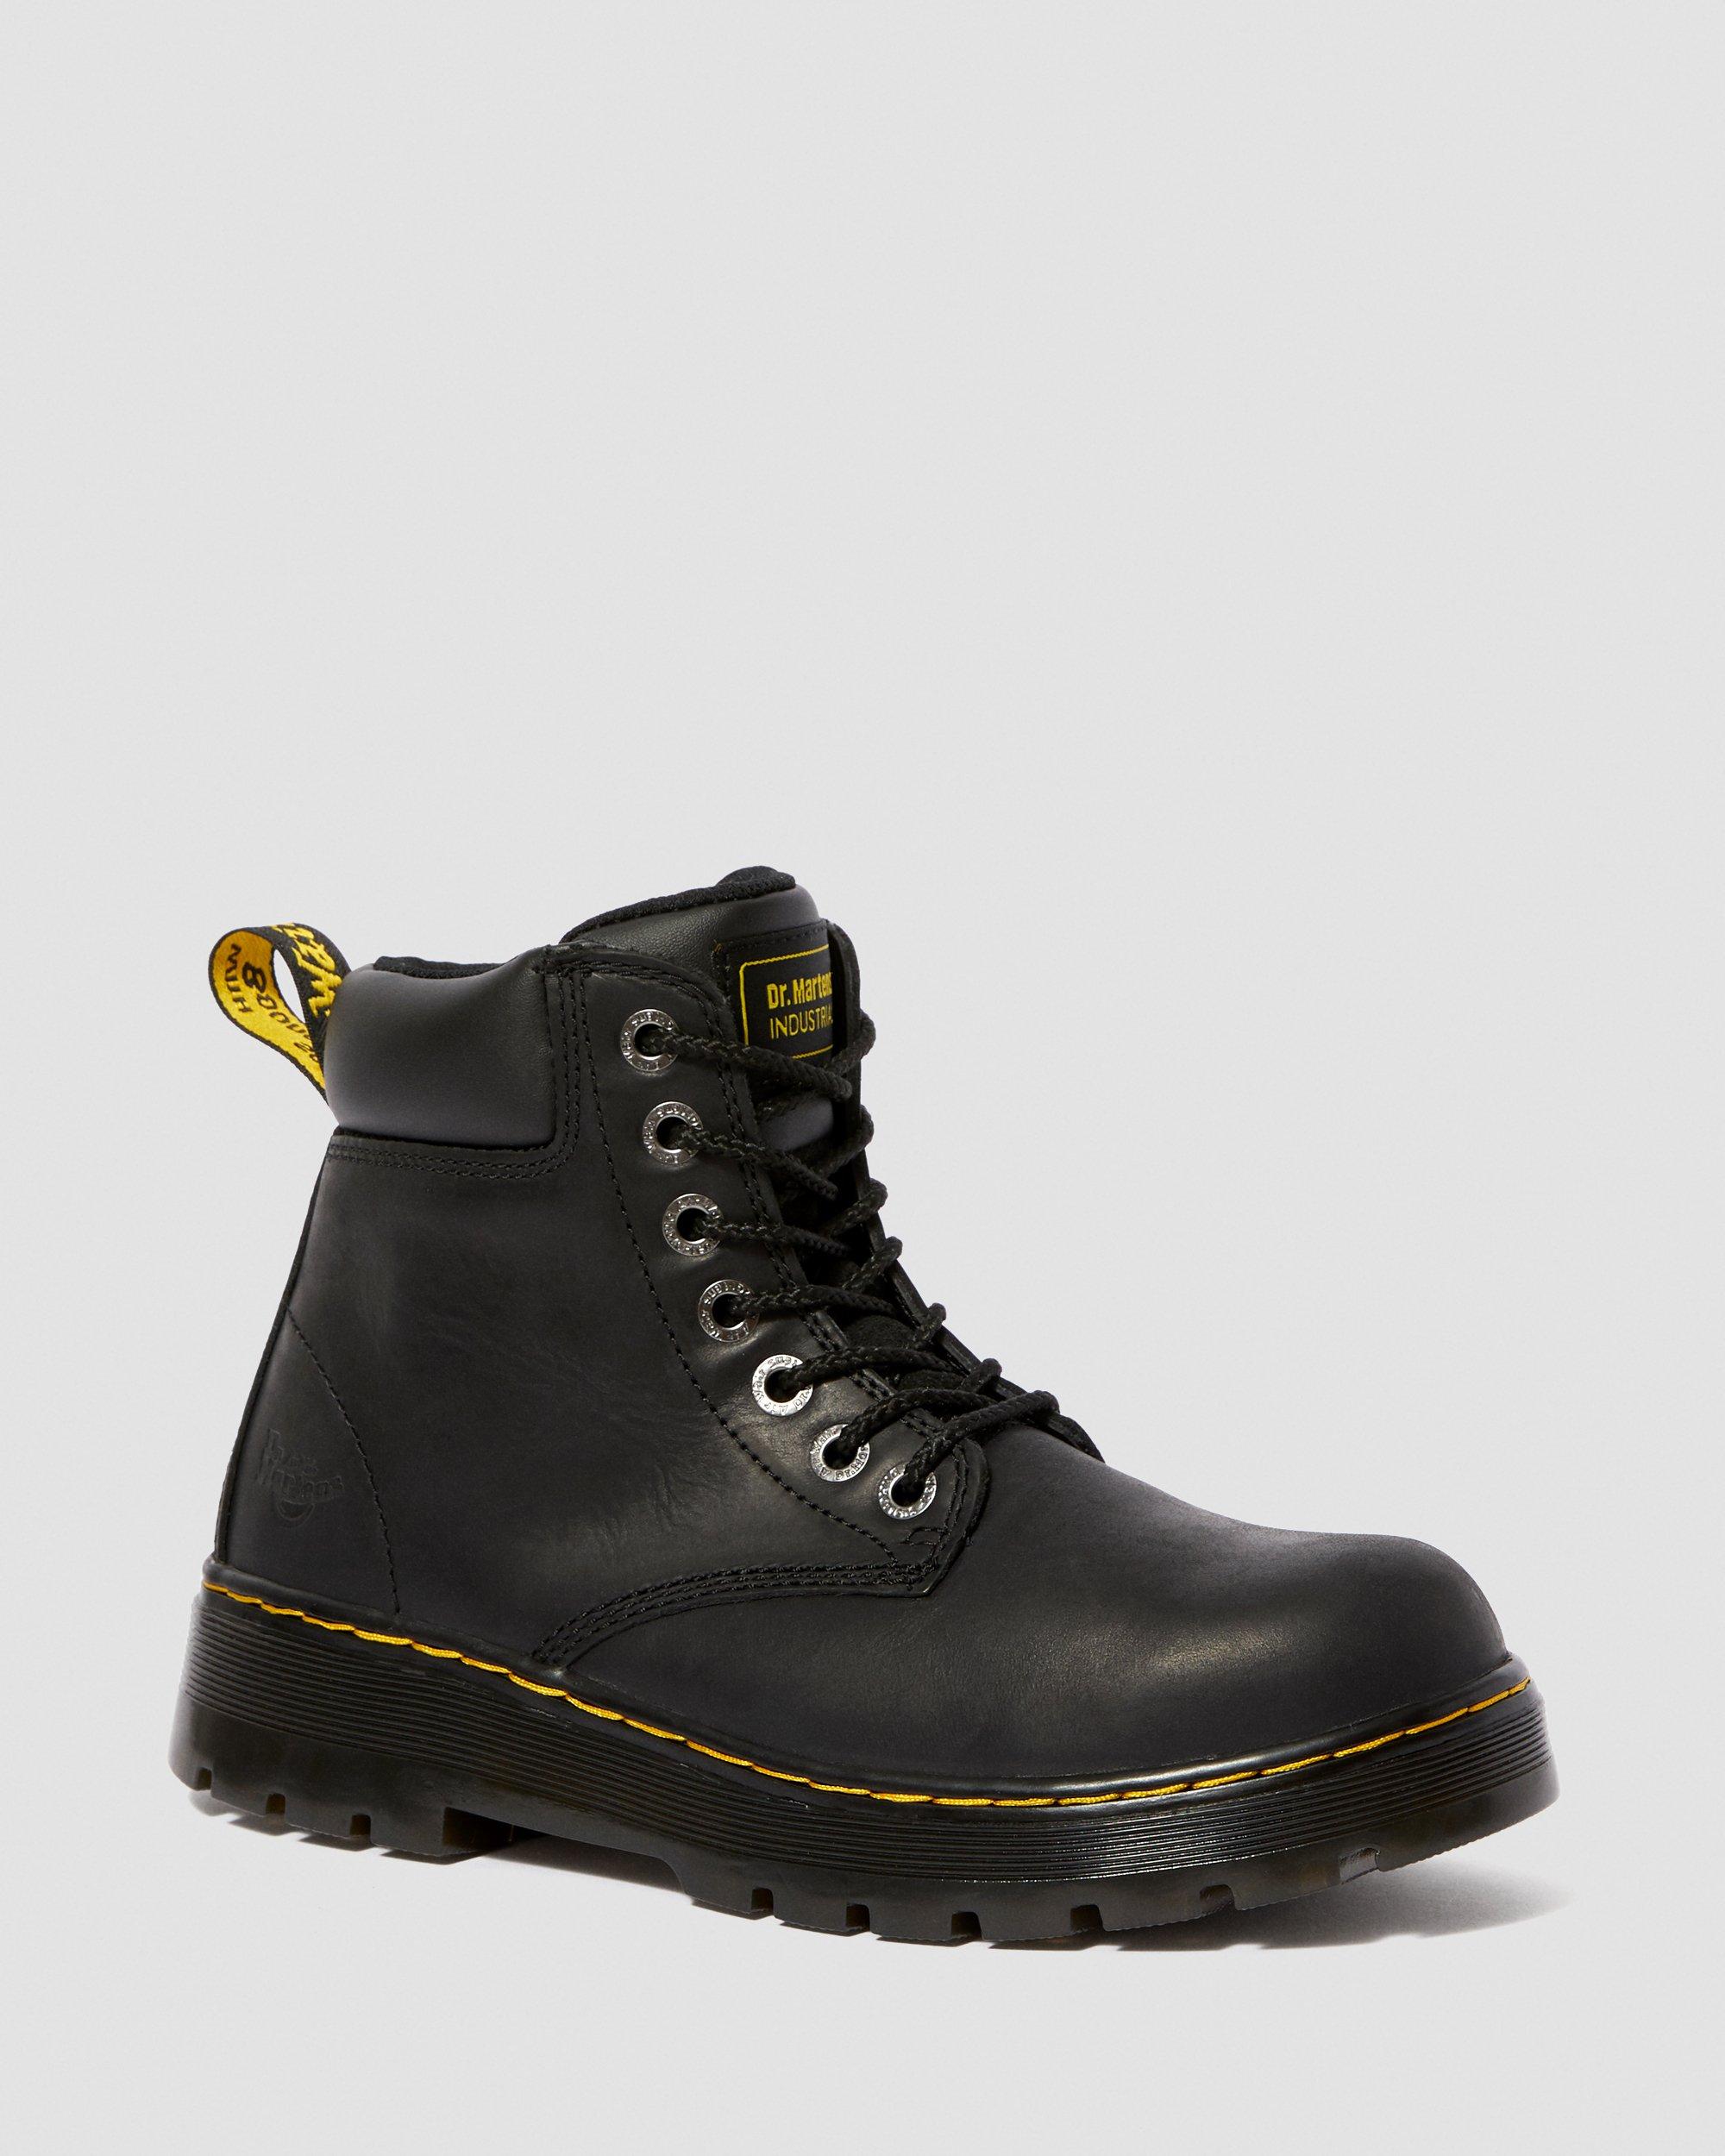 WINCH WYOMING WORK BOOTS | Dr. Martens 